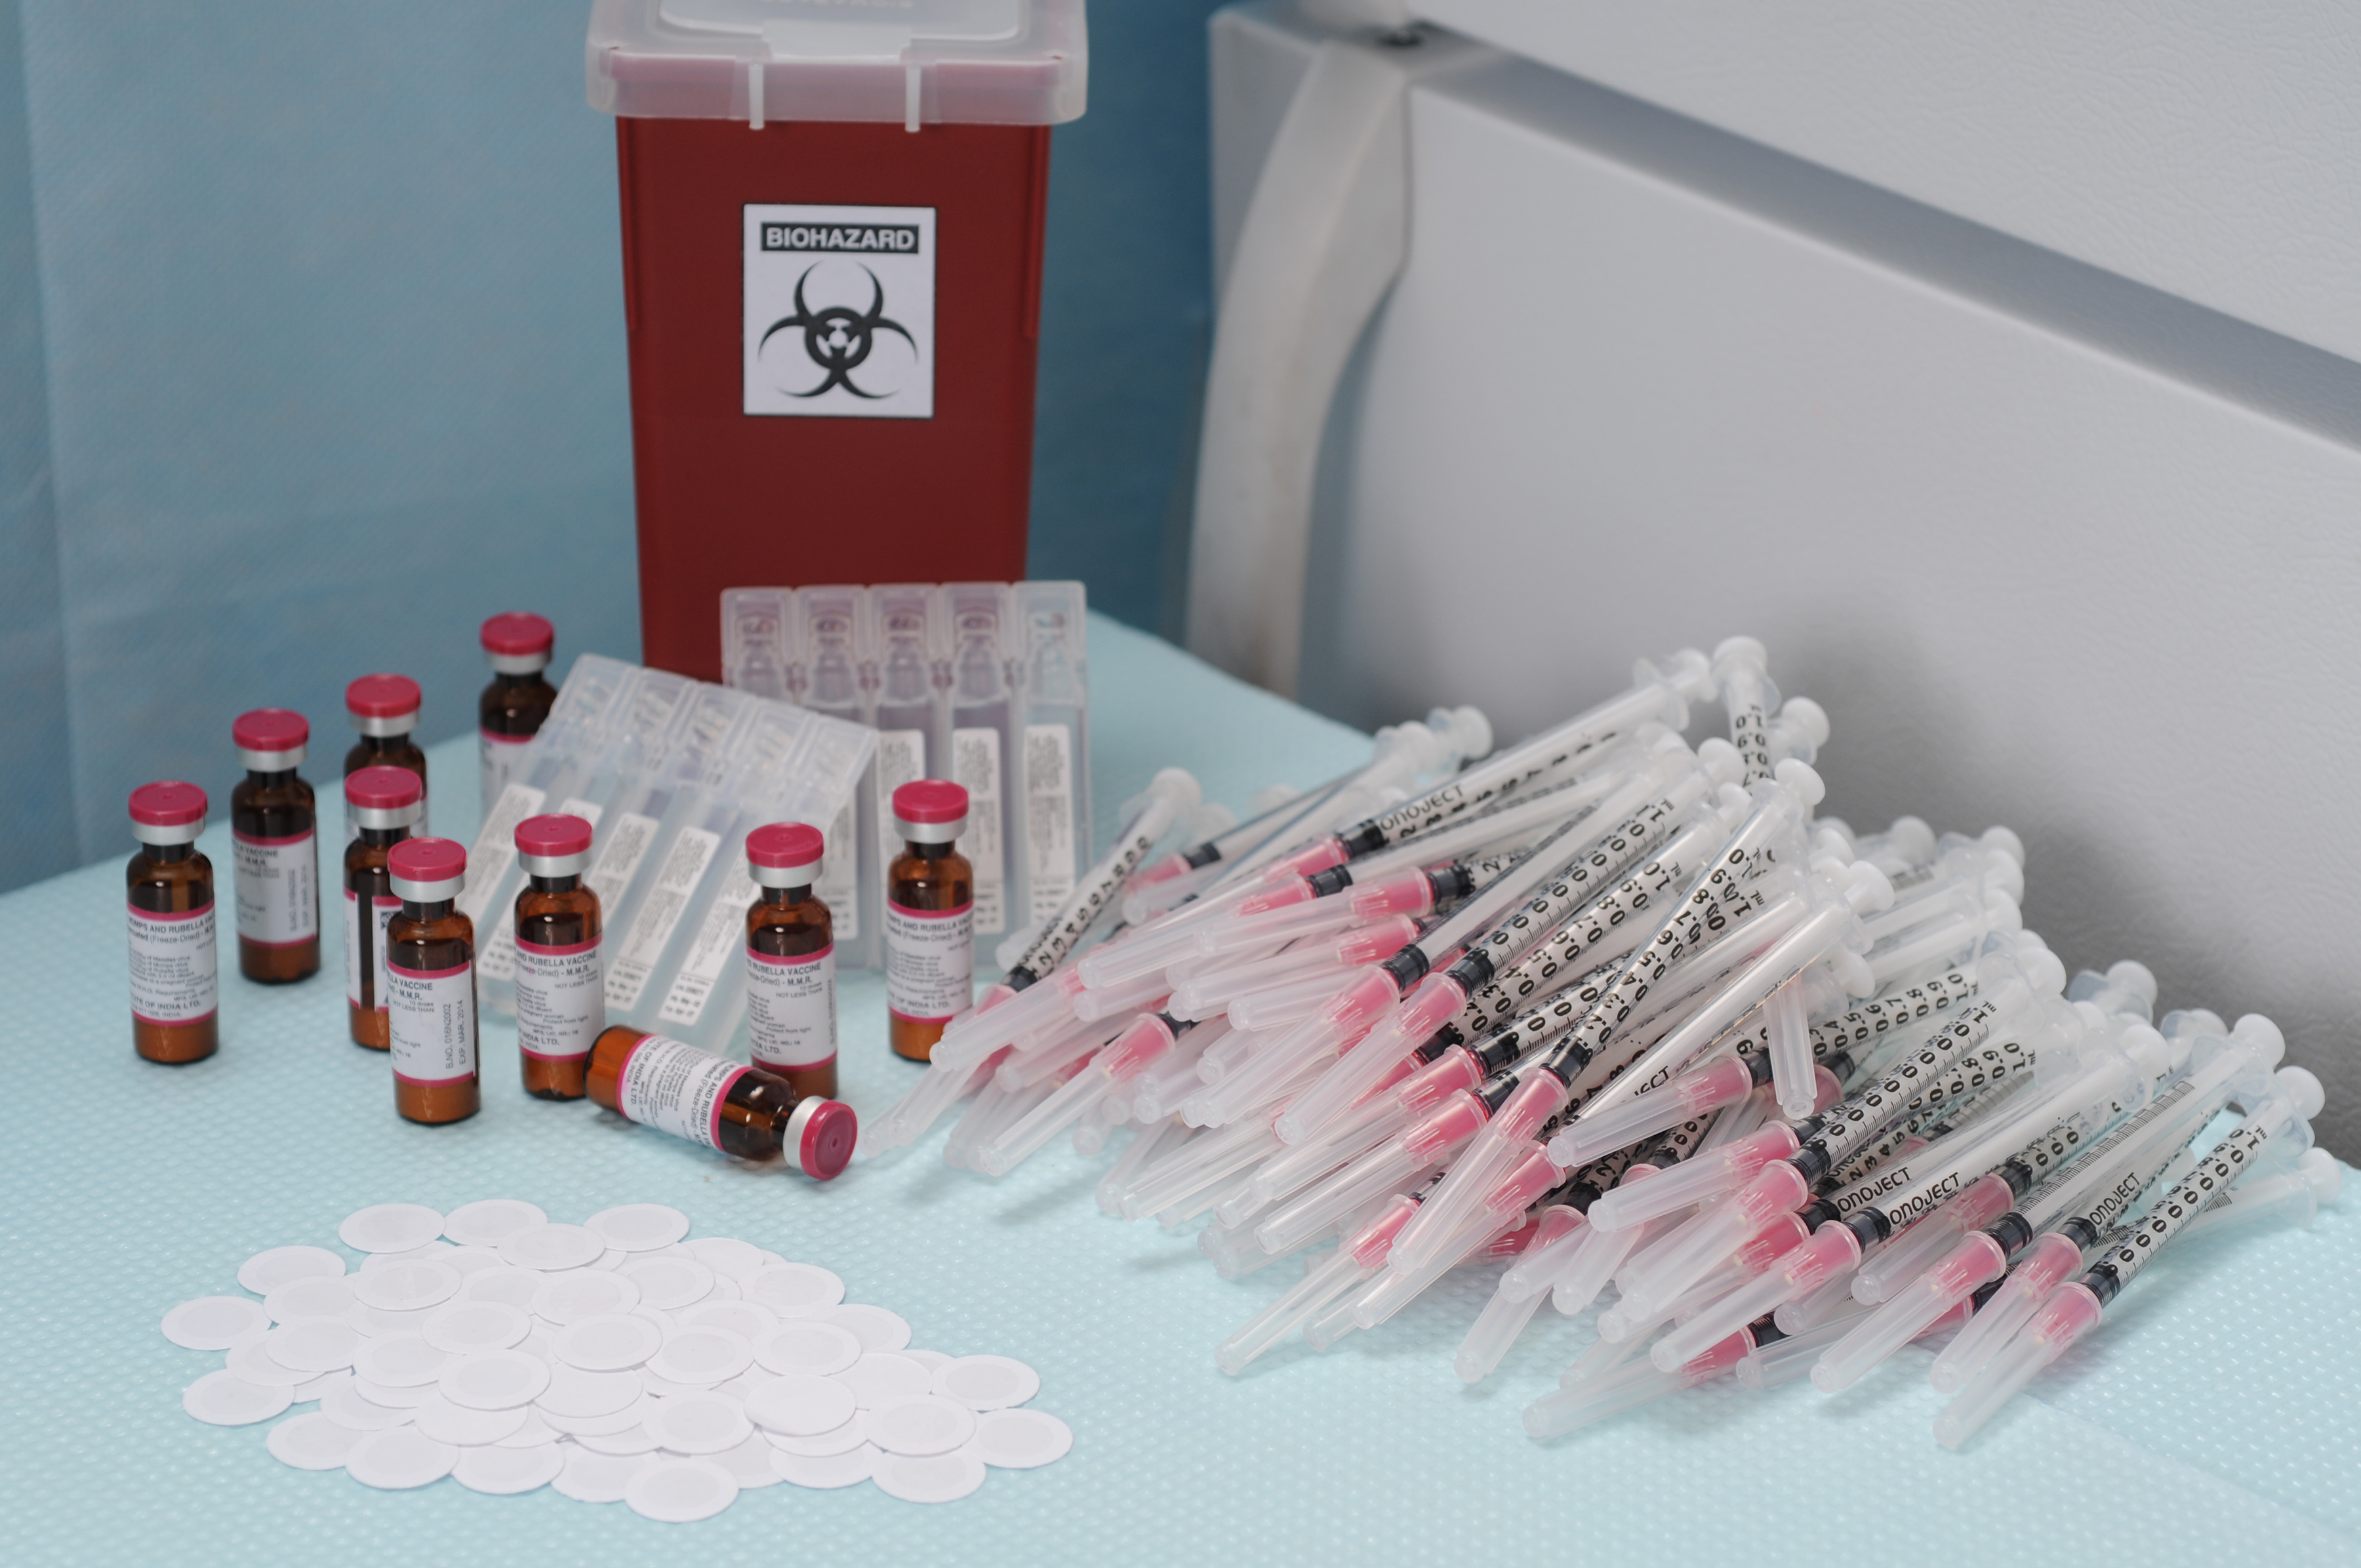 The 100 microneedle patches (white) in the foreground could replace everything in the background: the 100 needles and syringes, 10 ten-dose vials of measles vaccine with diluent, a biohazards box for sharps waste disposal, and a refrigerator for cold chain storage. (Photo: Gary Meek)